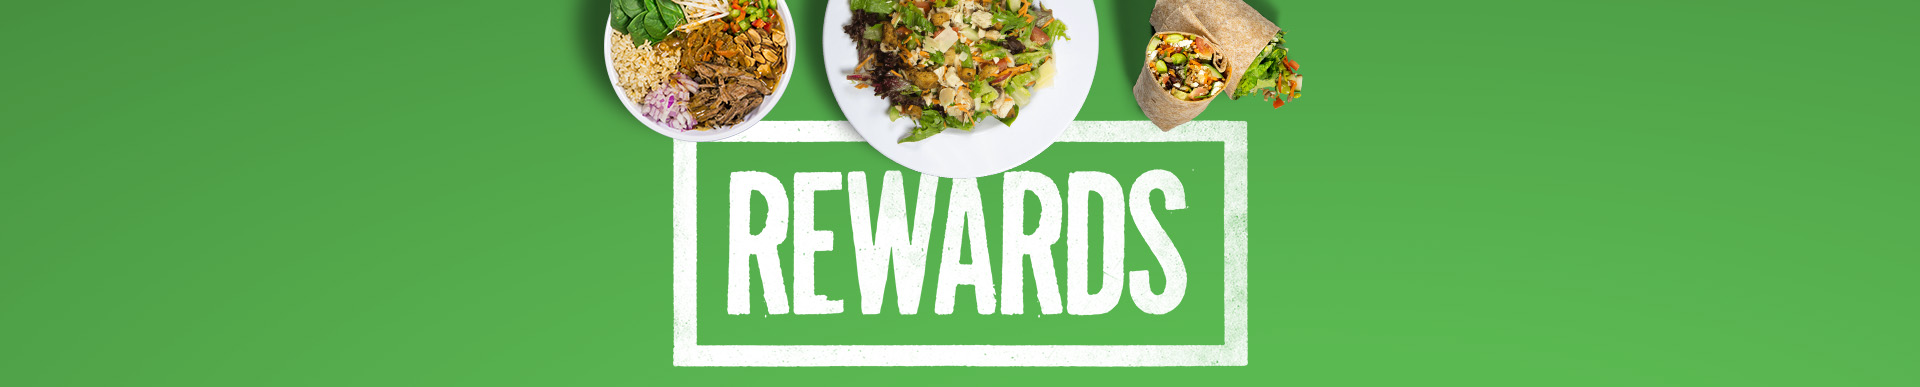 Rewards and Online Ordering for Nalley Fresh Bowls Wraps and Salads